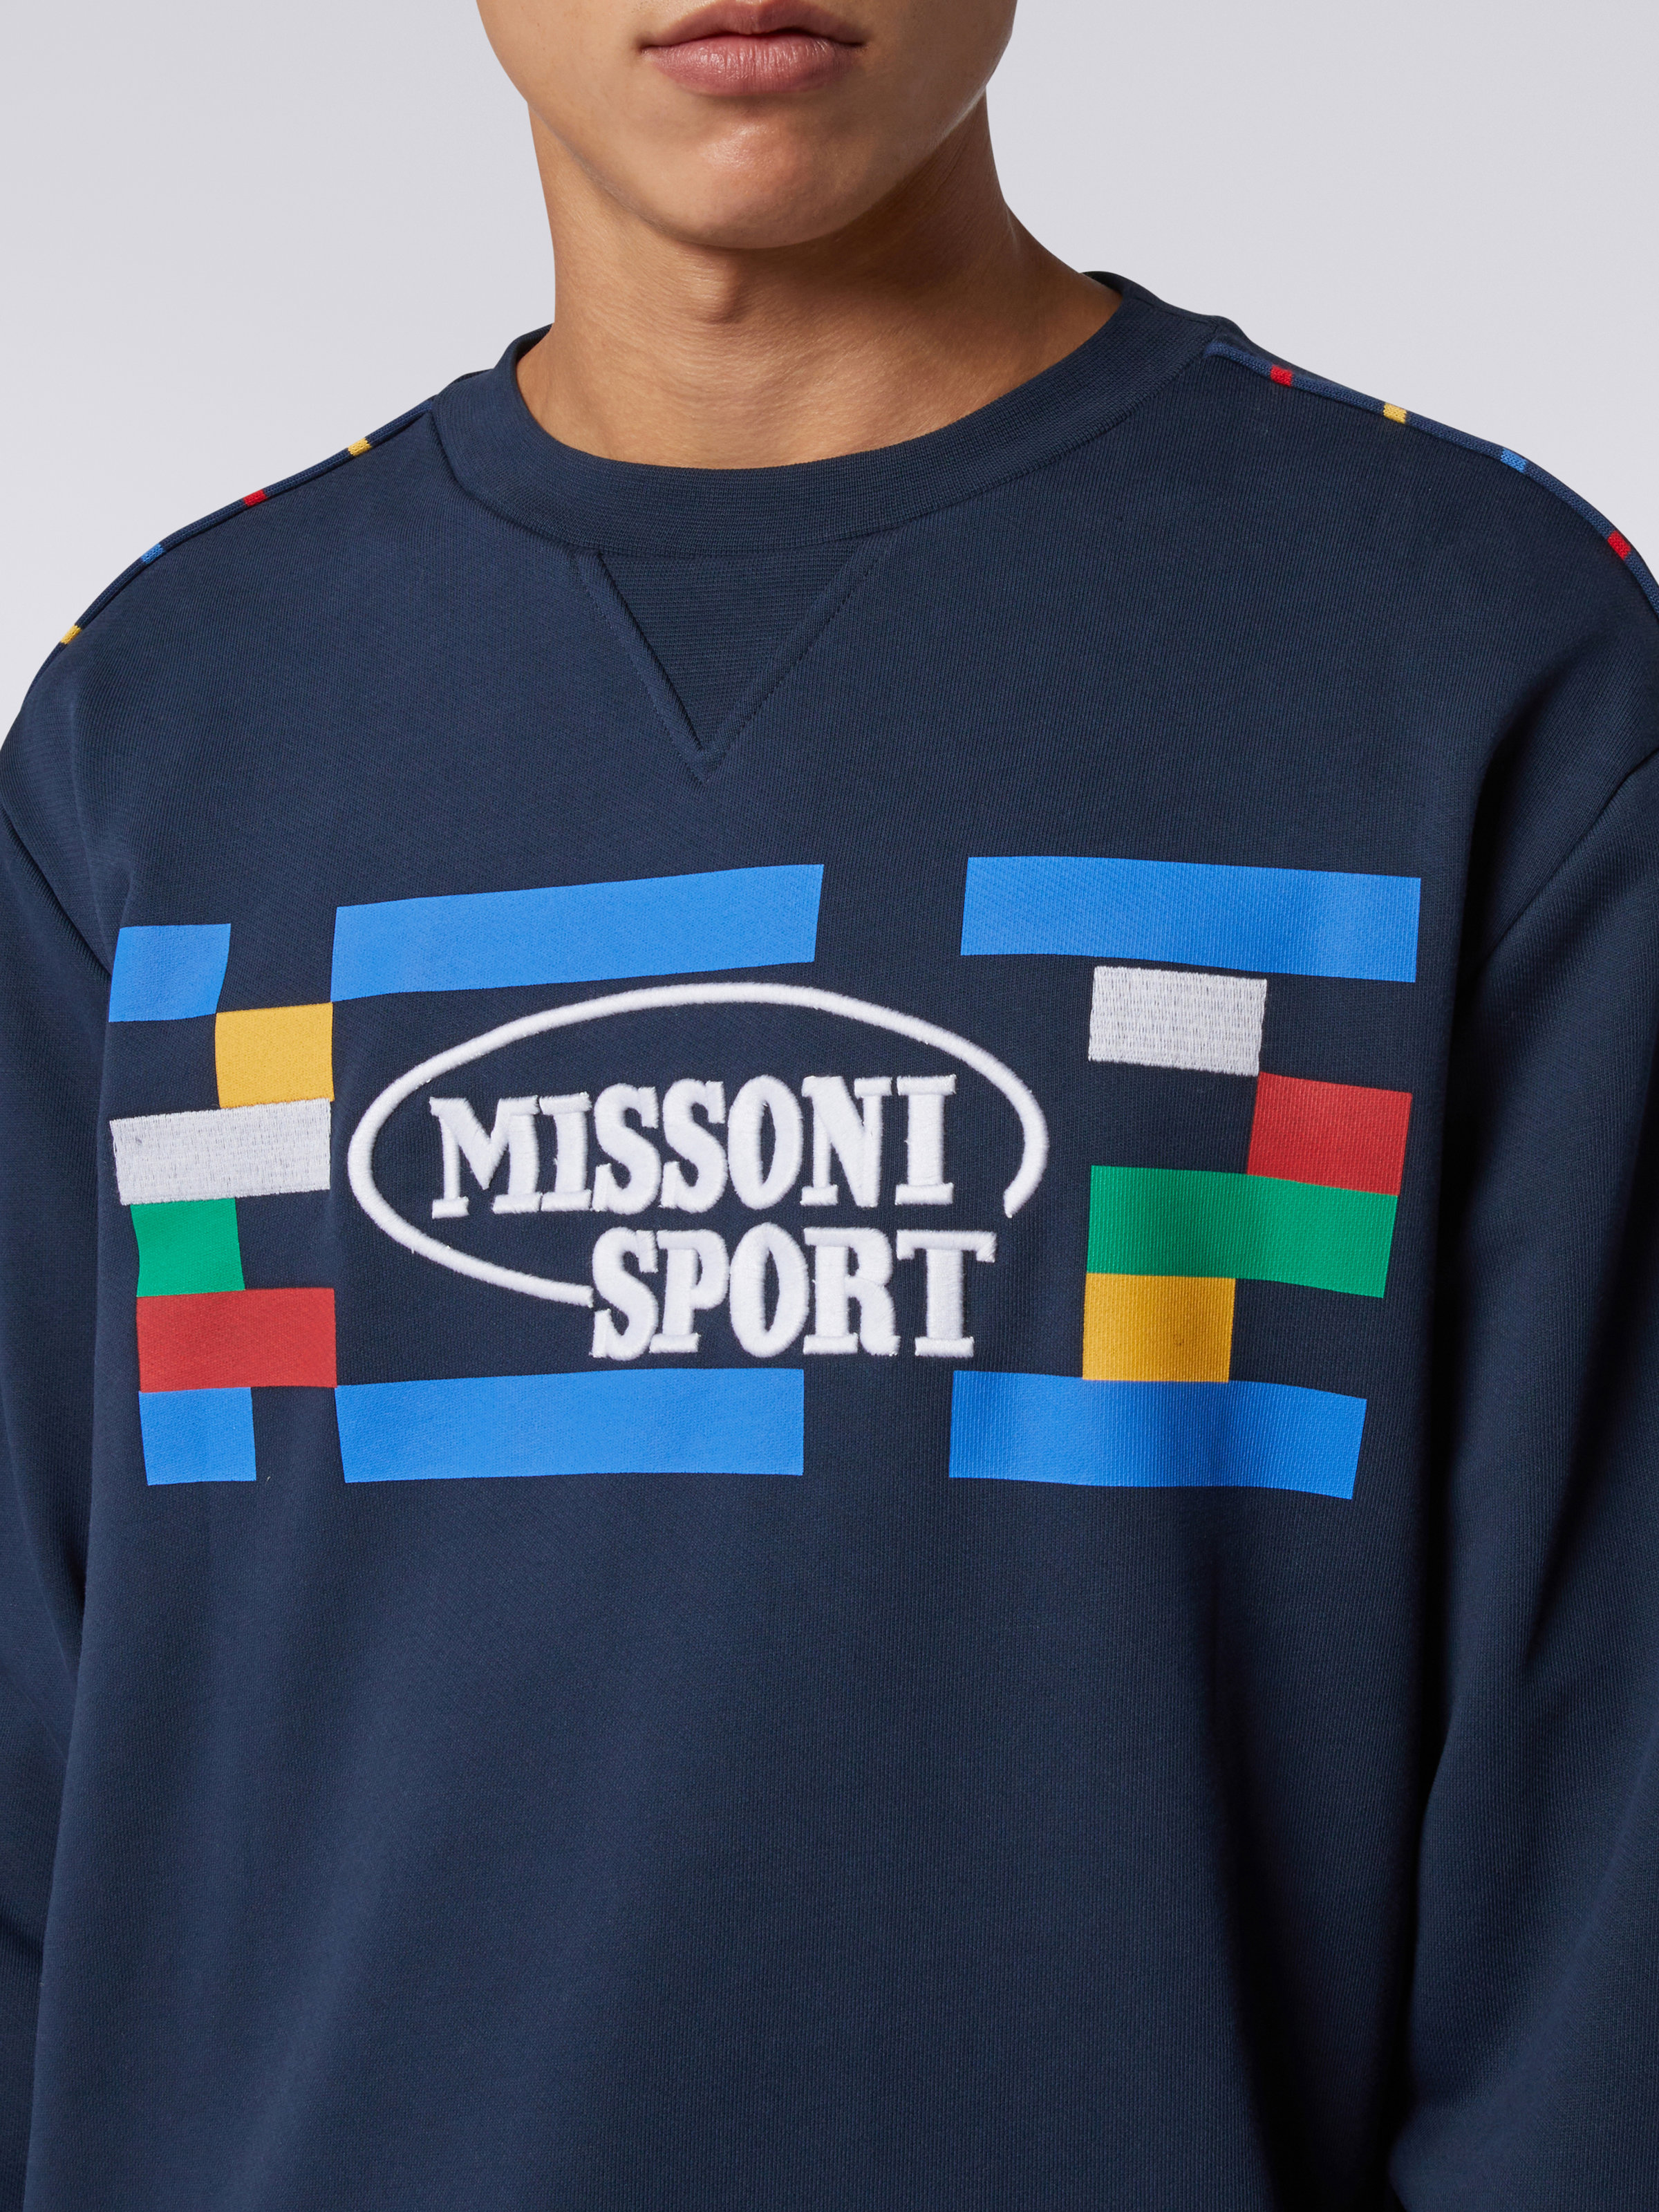 Crew-neck cotton sweatshirt with Legacy logo and knitted piping, Navy Blue  - 4